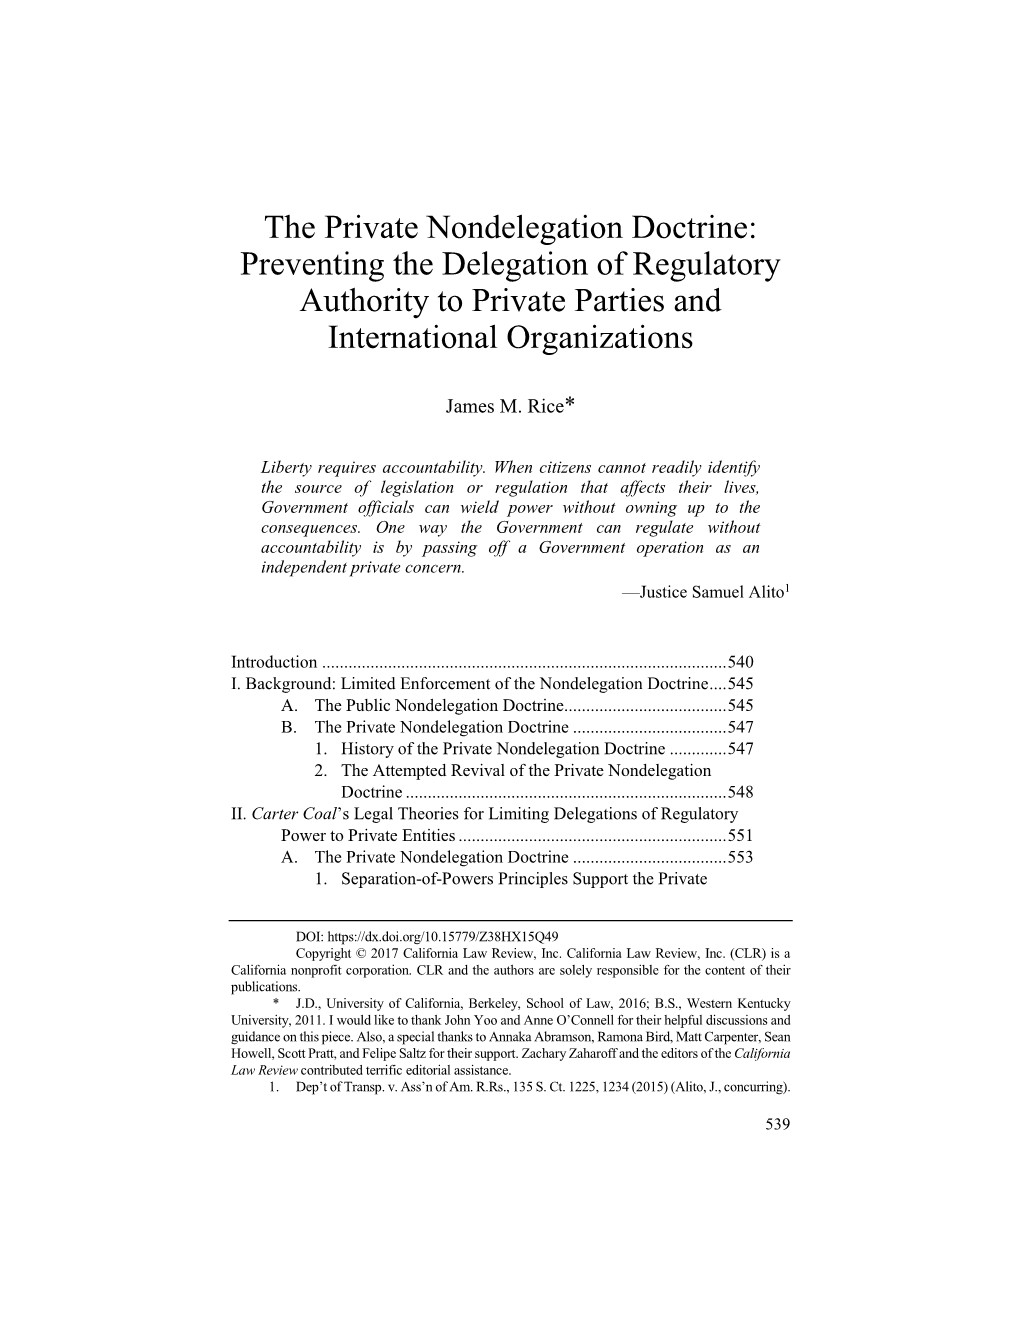 Nondelegation Doctrine: Preventing the Delegation of Regulatory Authority to Private Parties and International Organizations